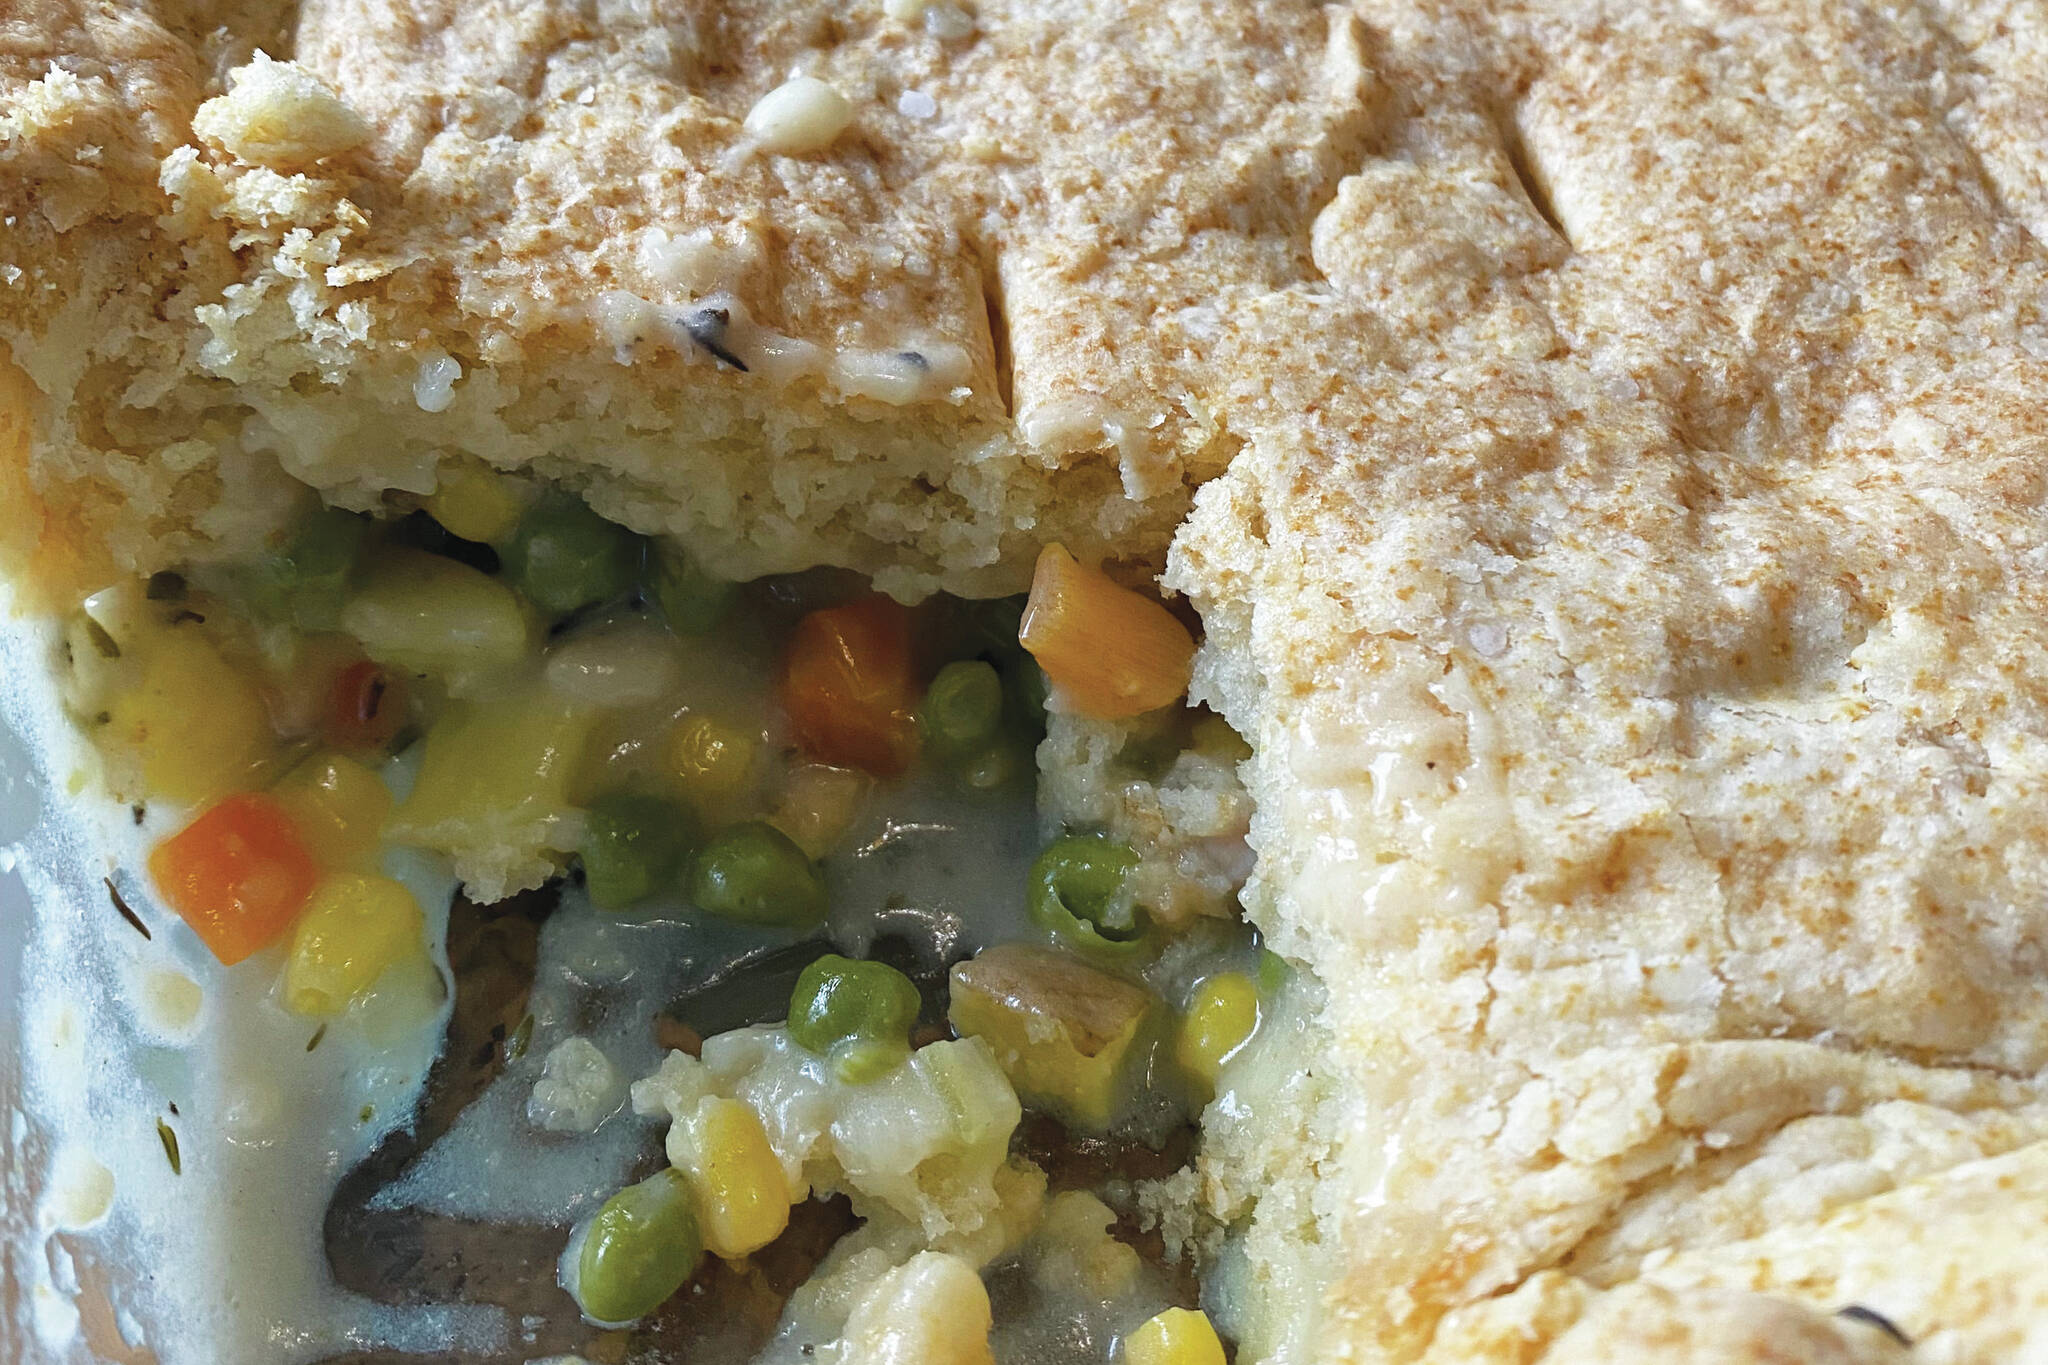 Shredded chicken and vegetables are topped with a butter crust in this classic chicken pot pie. (Photo by Tressa Dale/Peninsula Clarion)